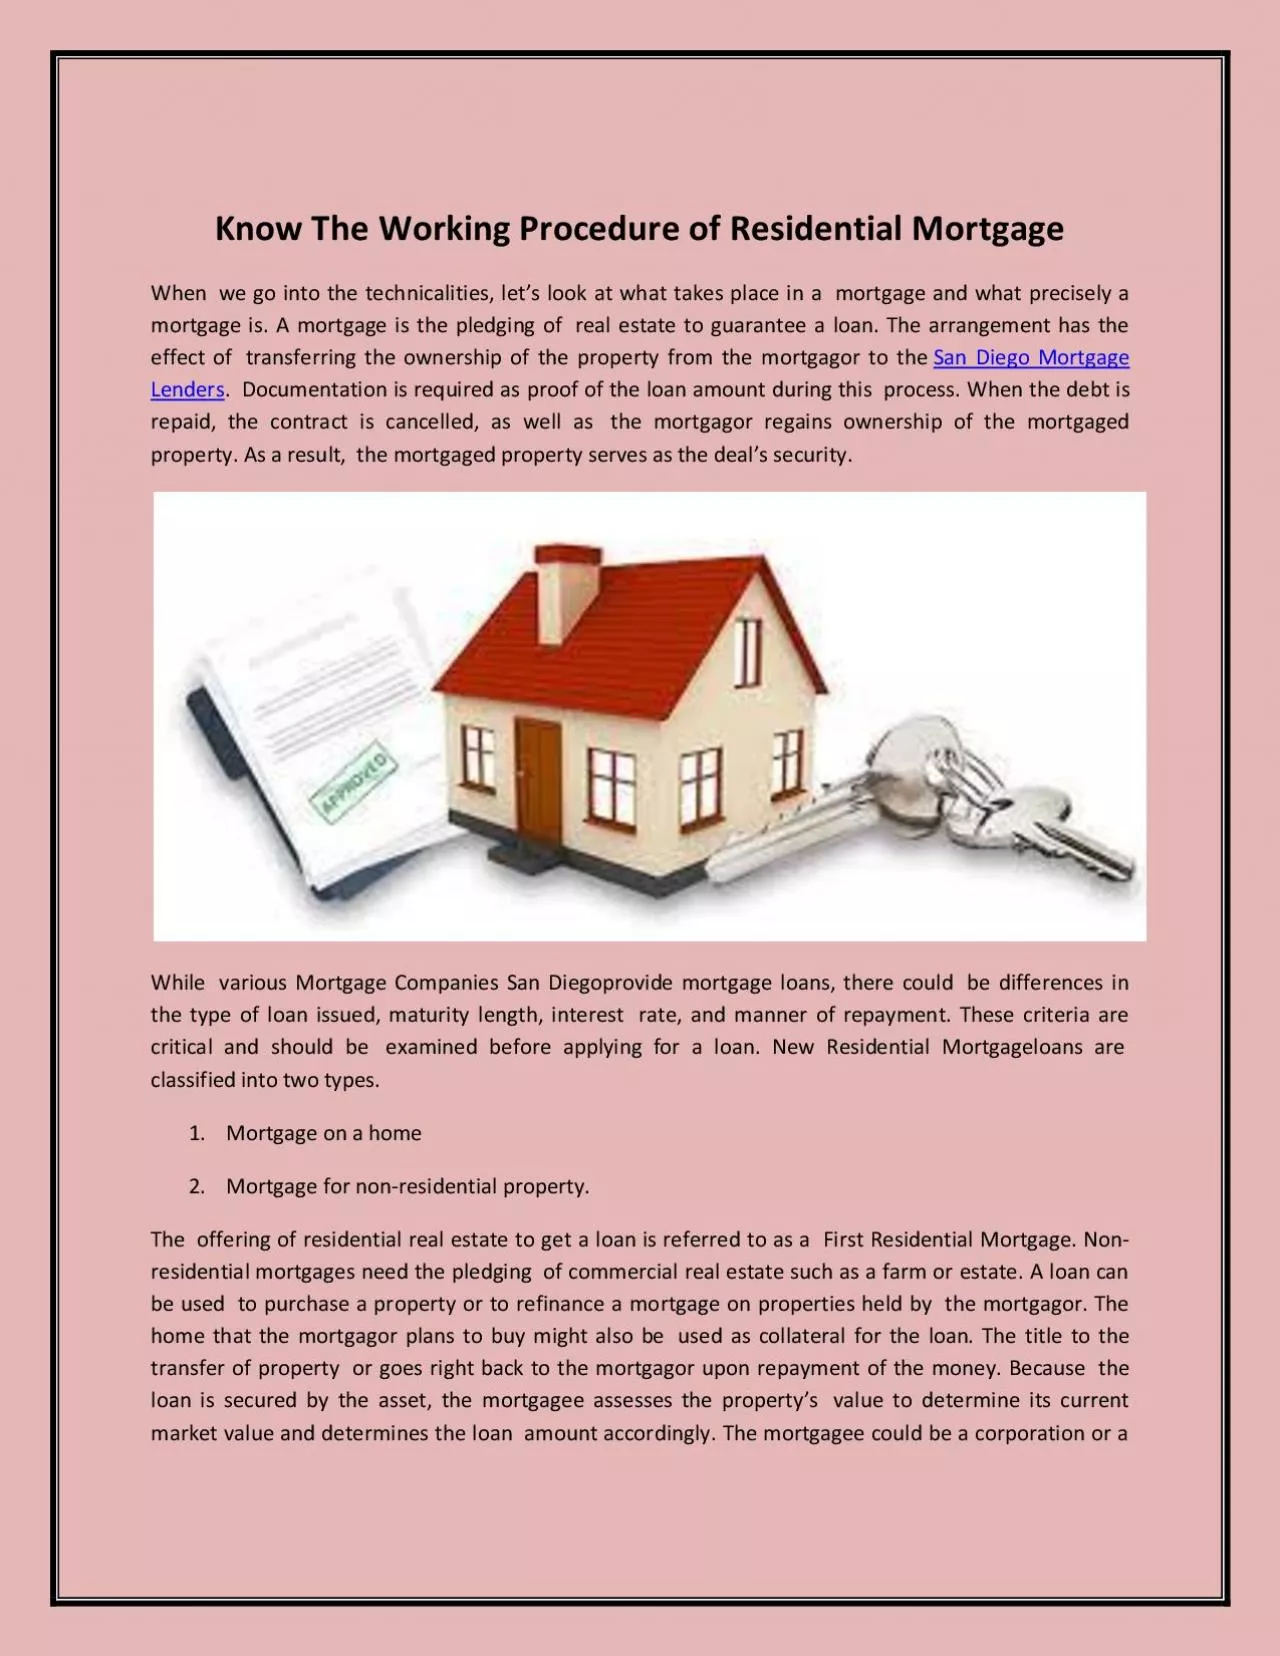 Know The Working Procedure of Residential Mortgage